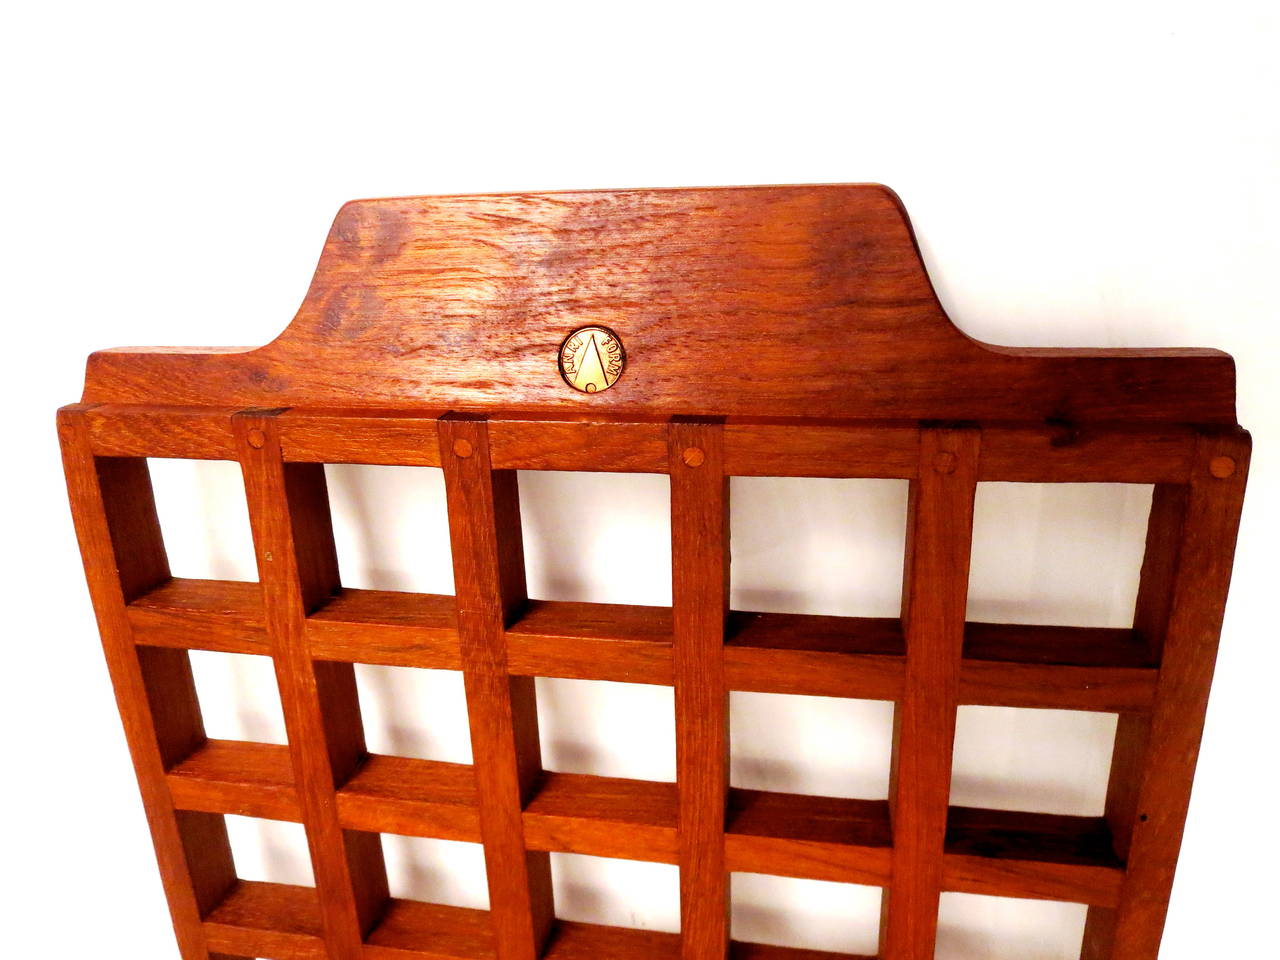 Italian 1950s Solid Teak Trivet Tray Made in Italy by Anri Form